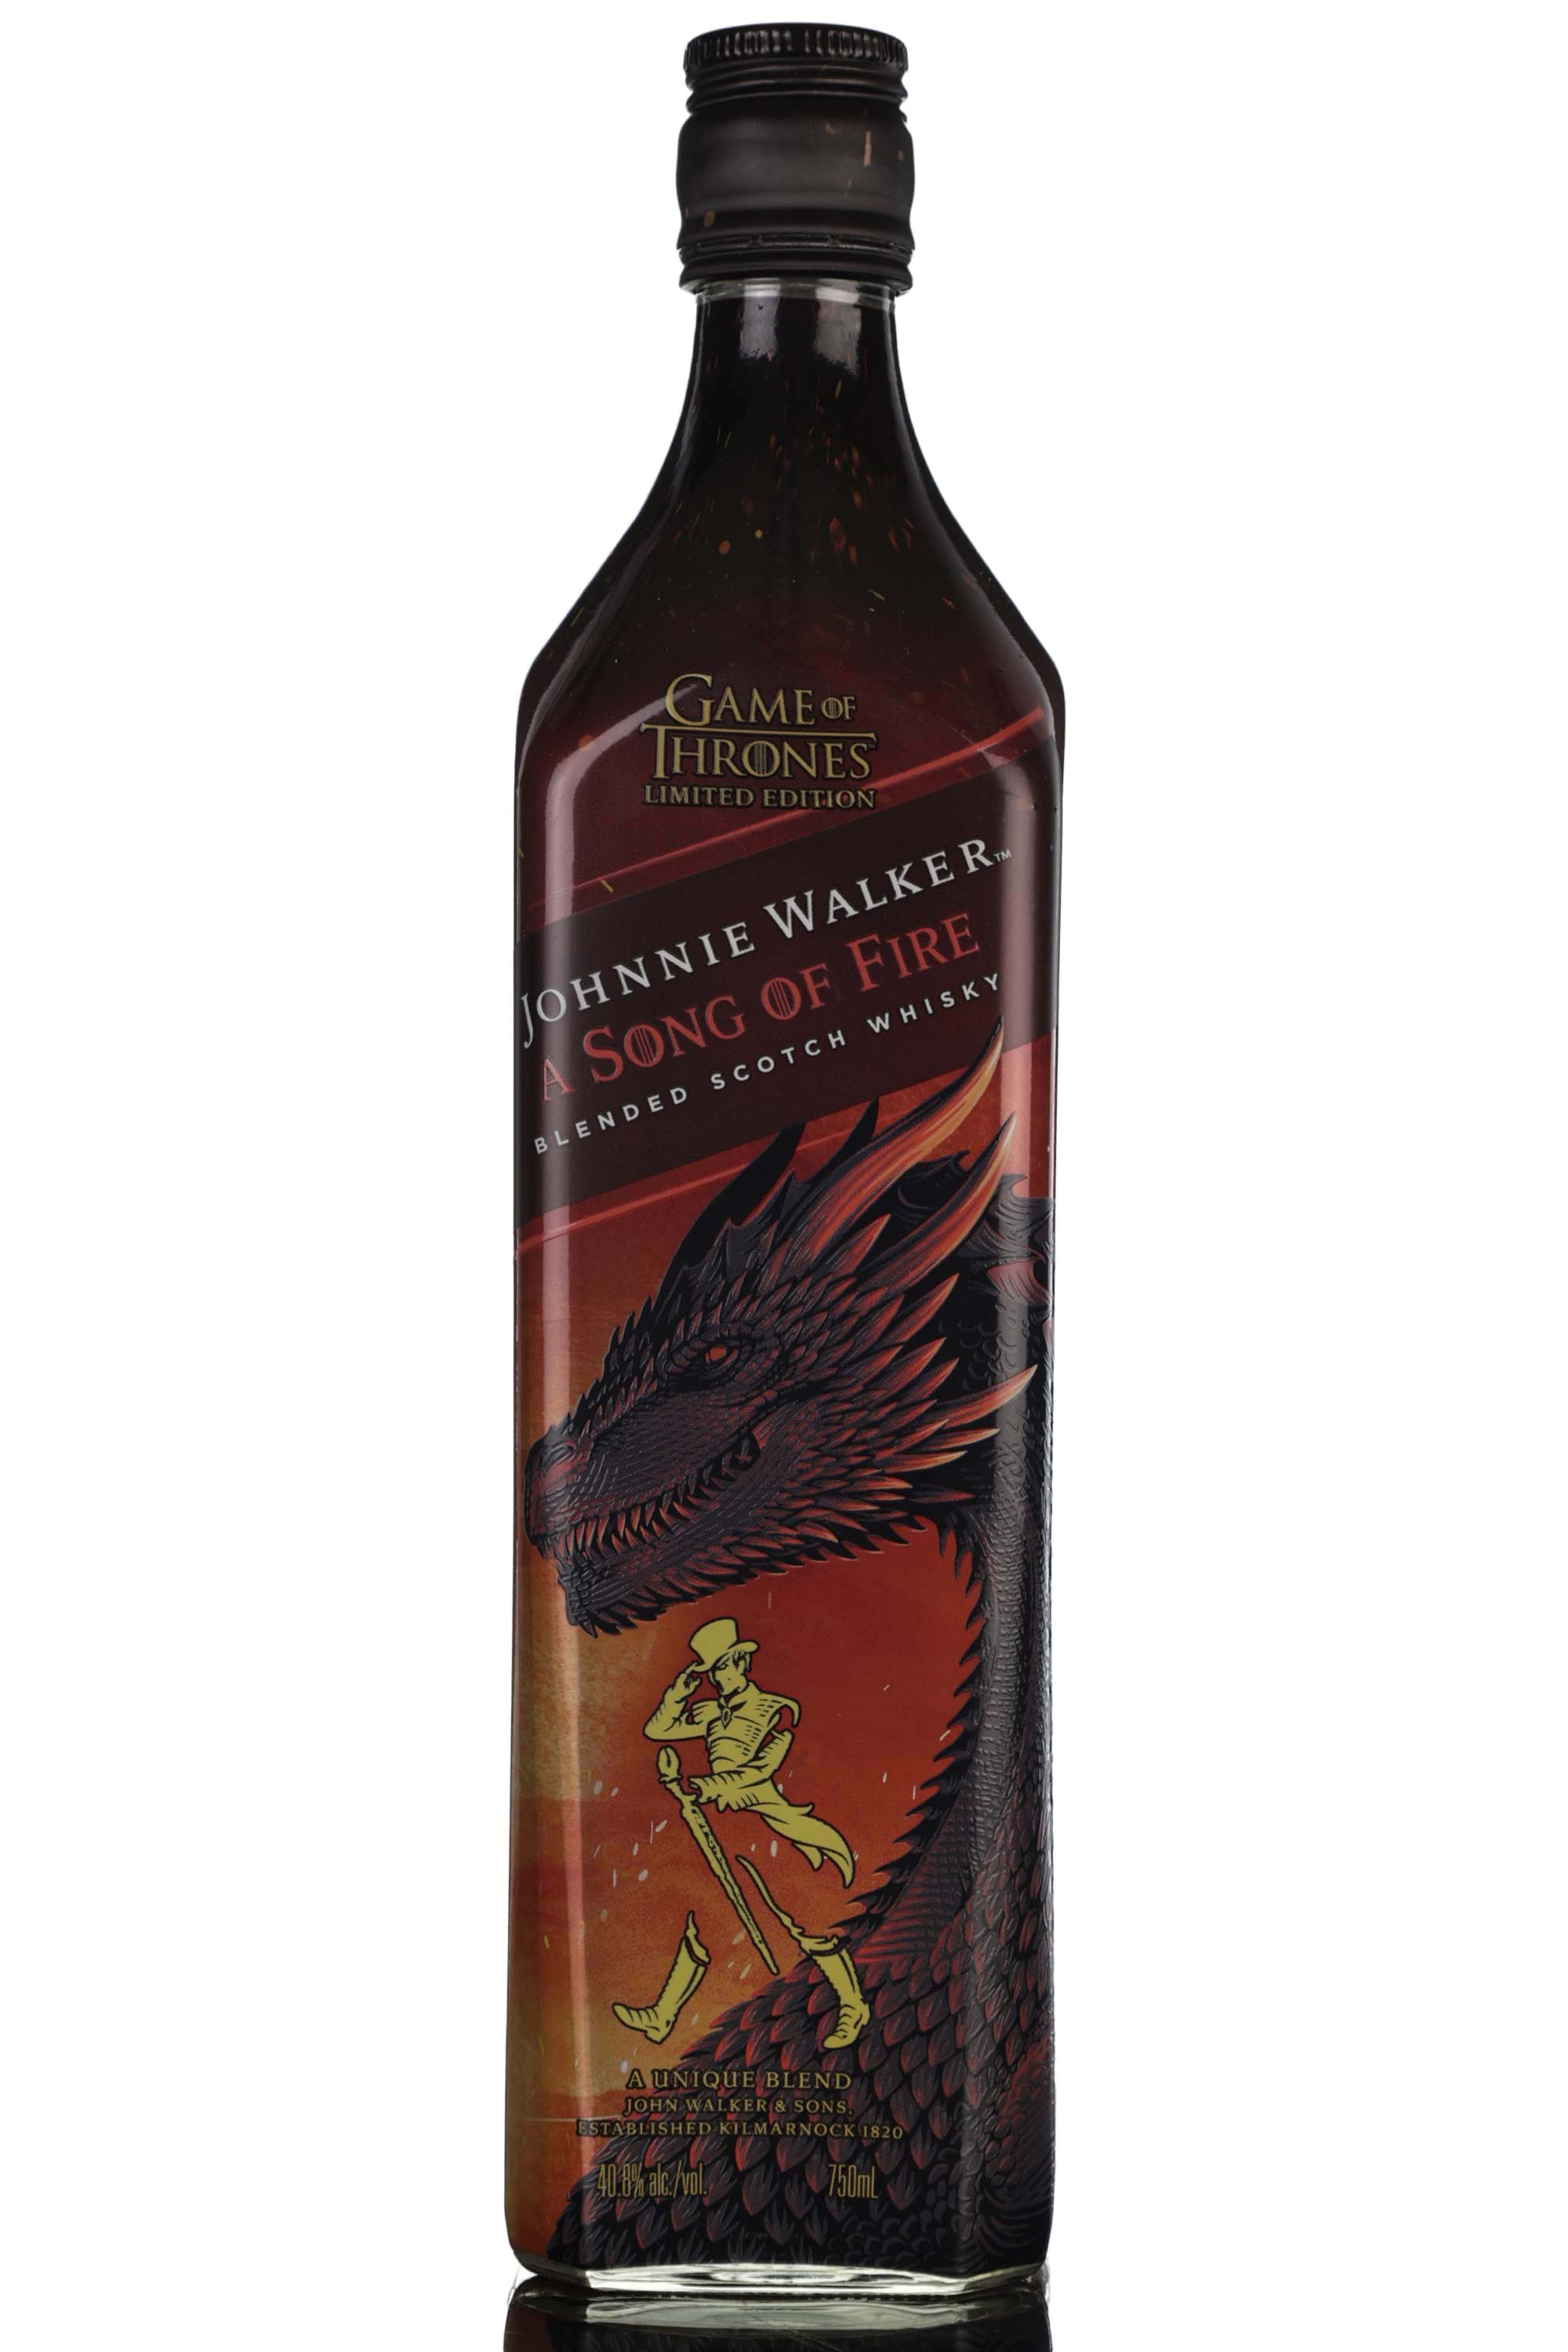 Johnnie Walker A Song Of Fire - Game Of Thrones - 2019 Release